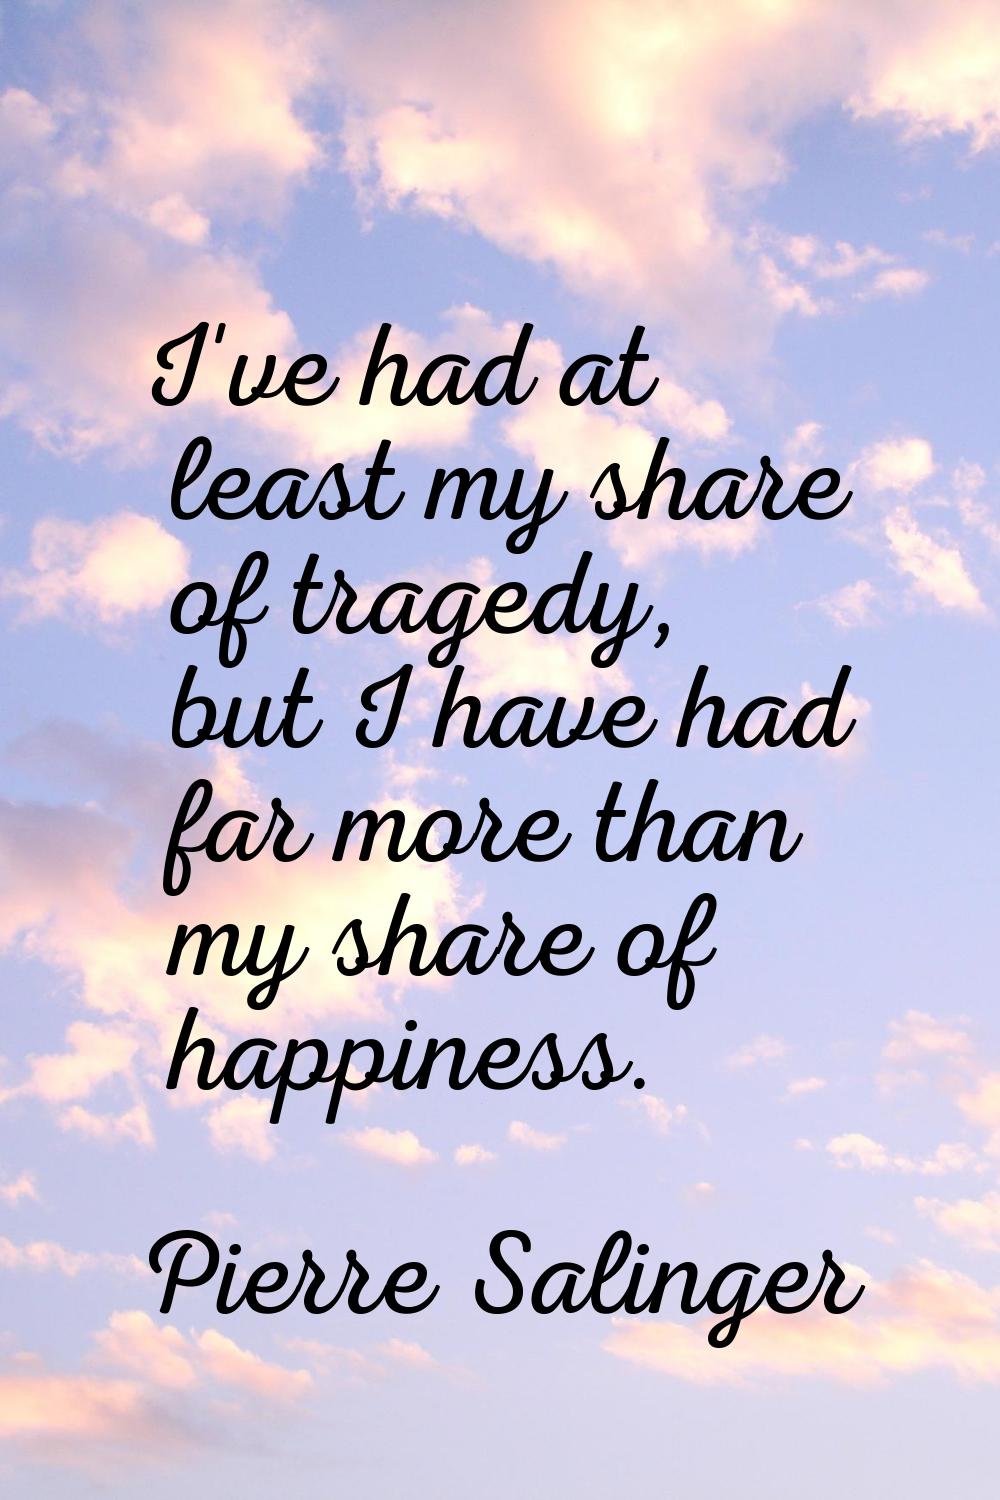 I've had at least my share of tragedy, but I have had far more than my share of happiness.